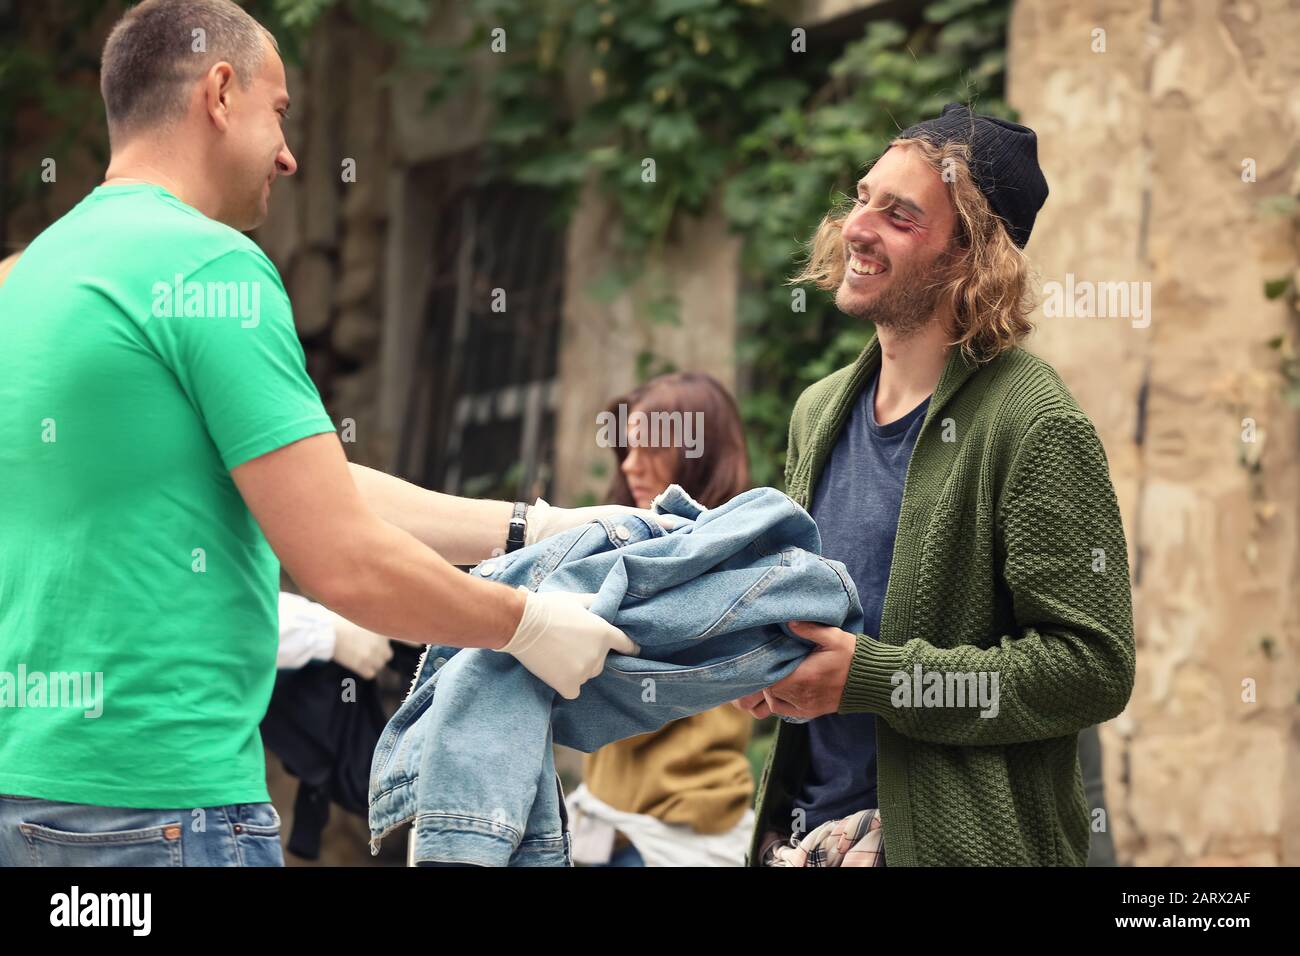 Volunteers giving clothes to homeless people outdoors Stock Photo